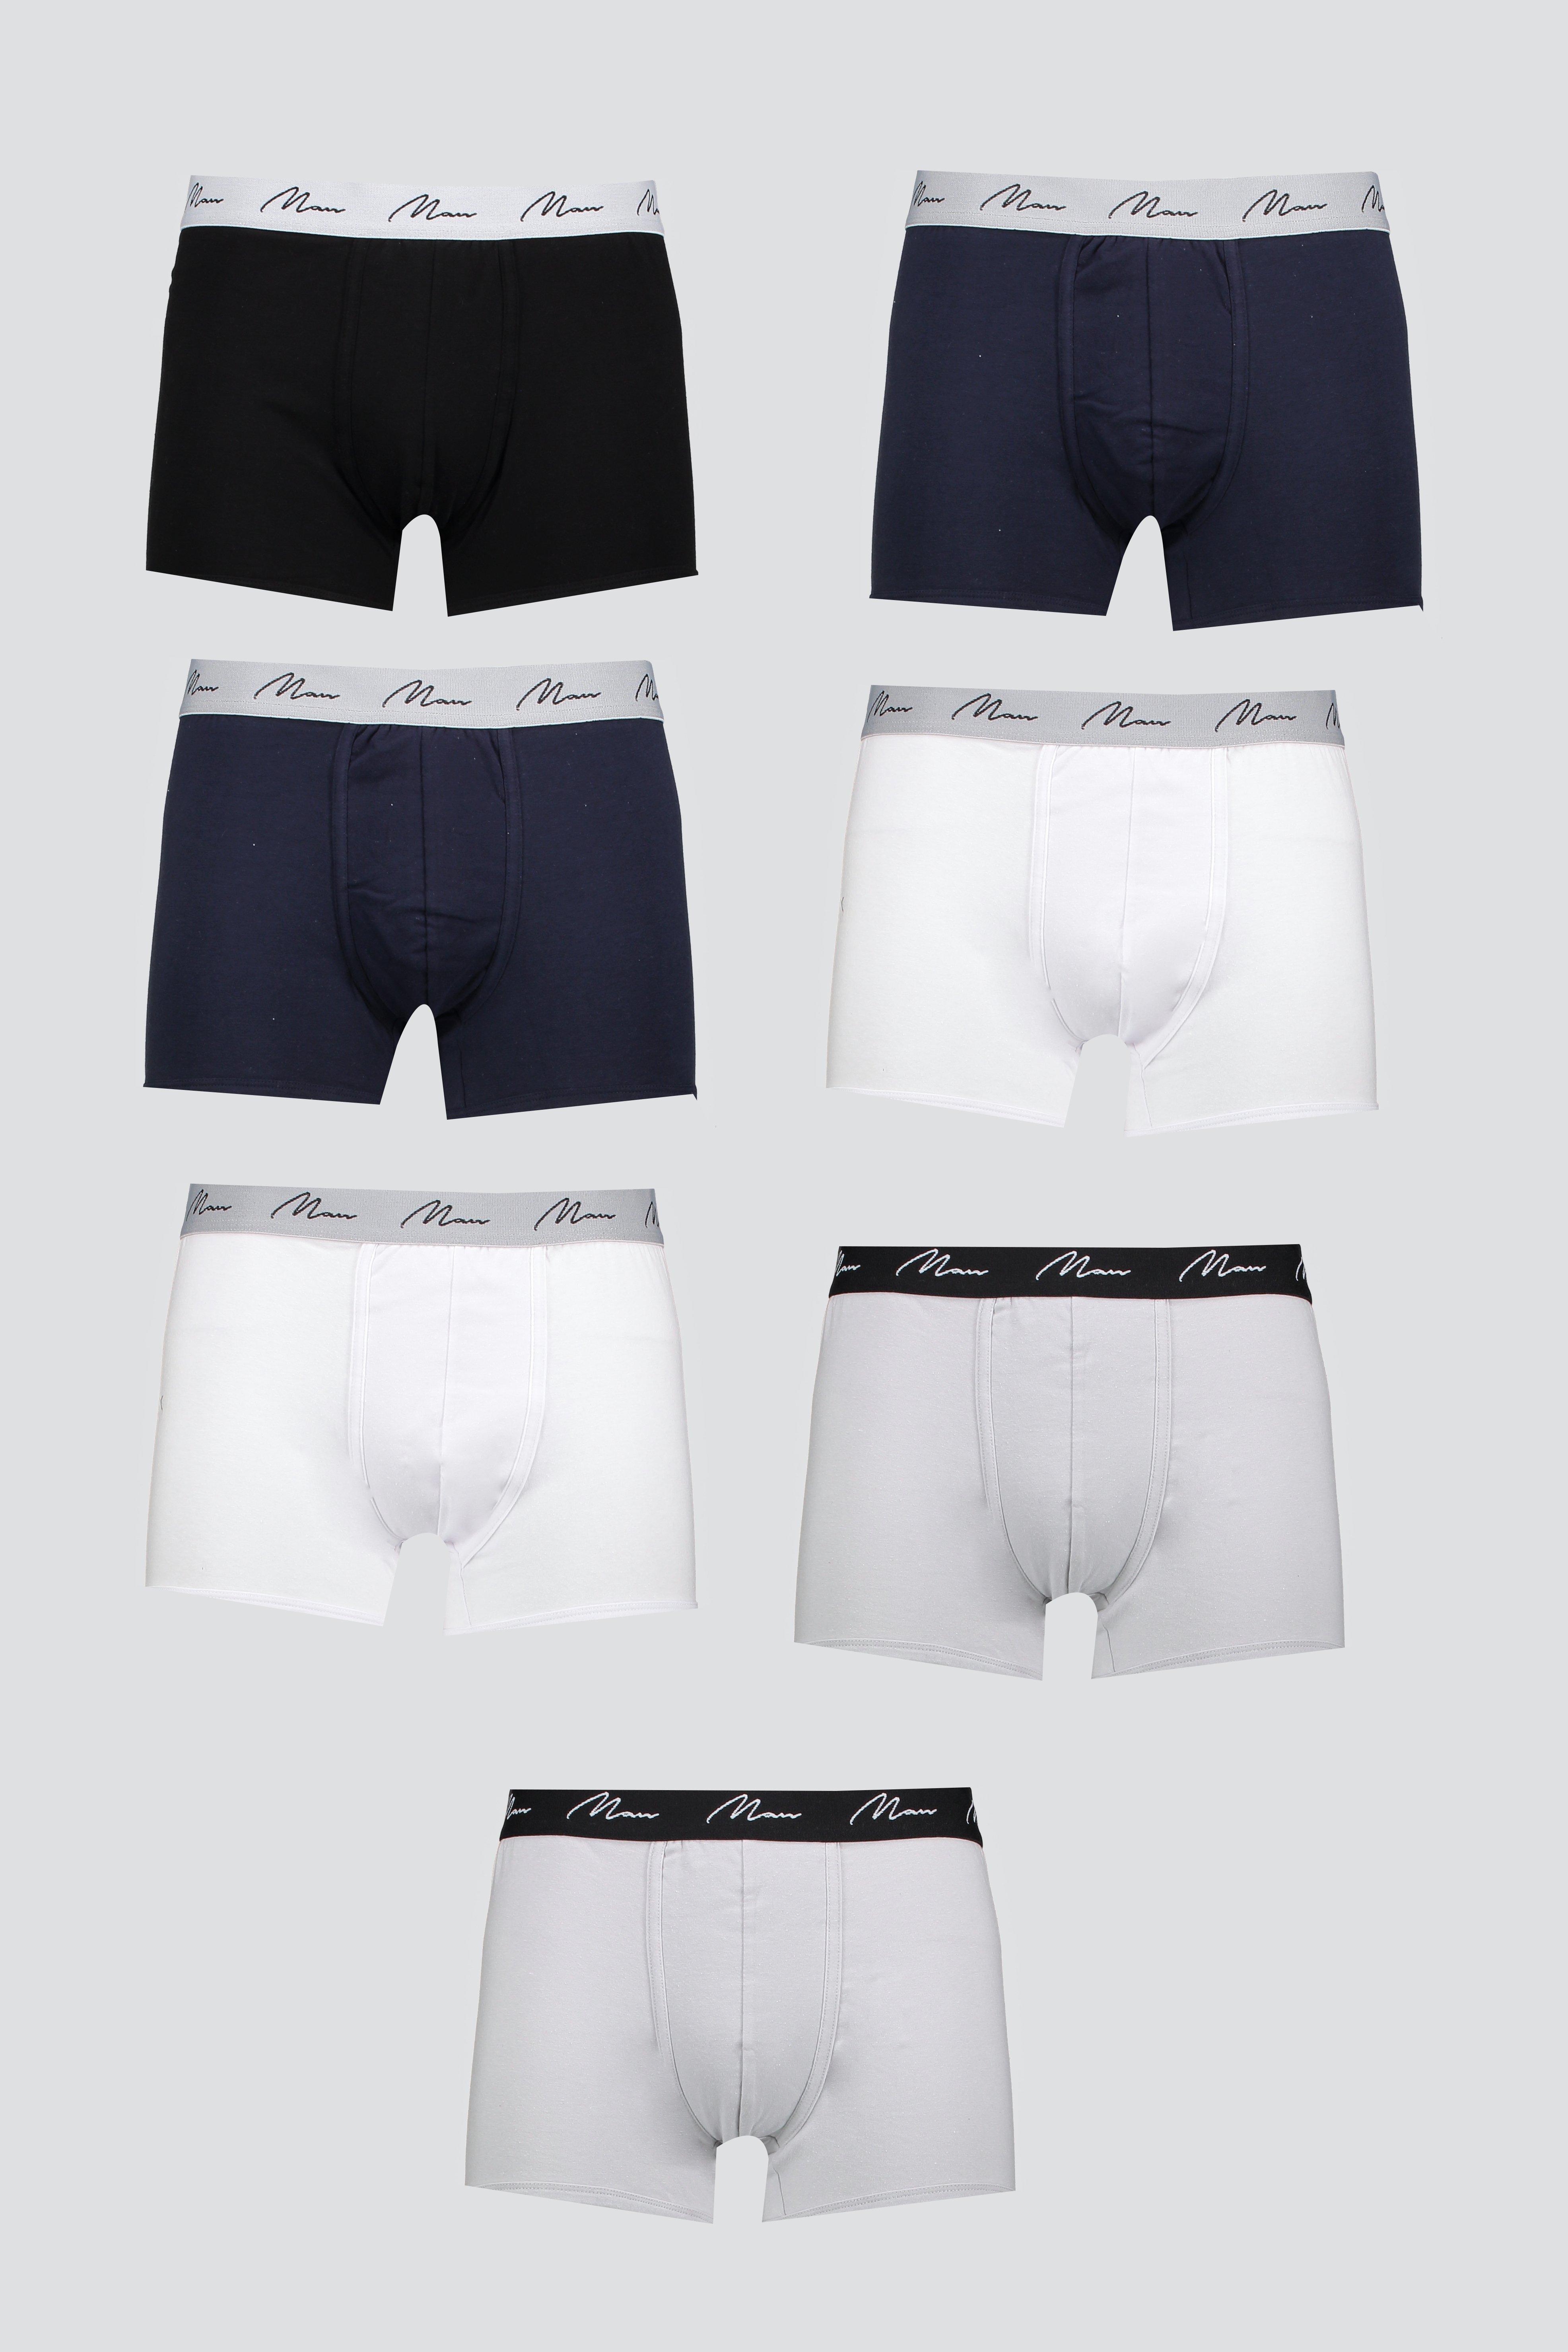 tall mens boxers